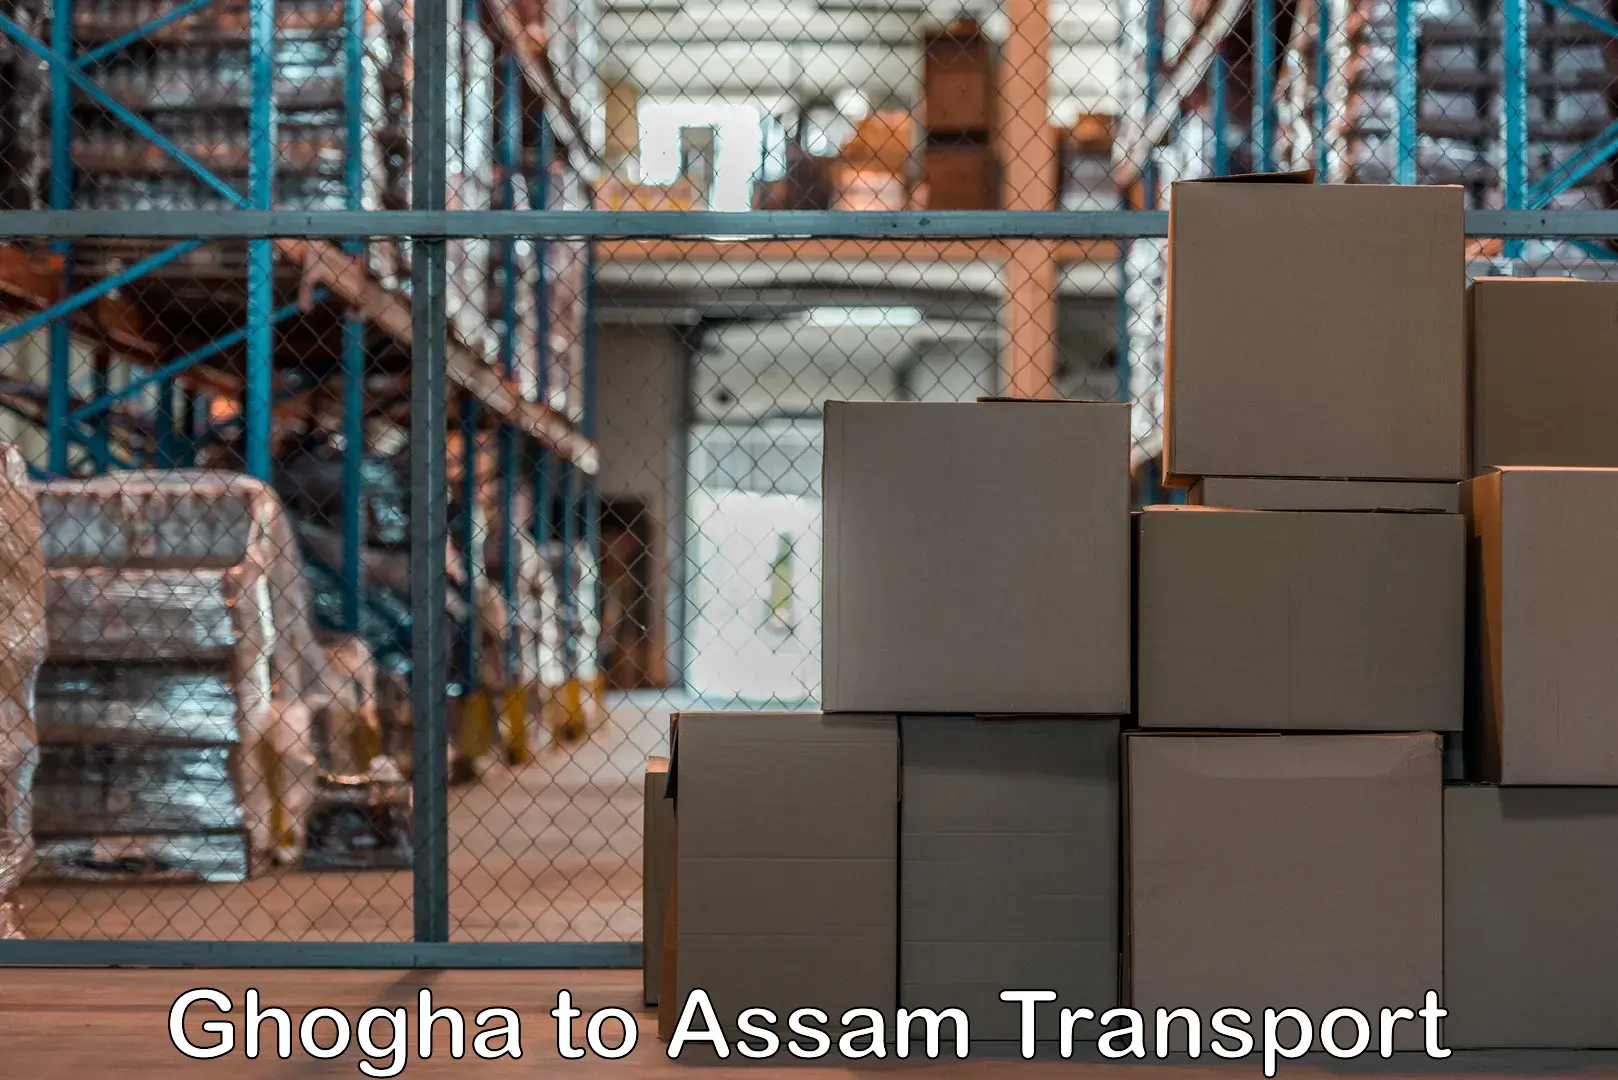 Road transport online services in Ghogha to Hojai Lanka